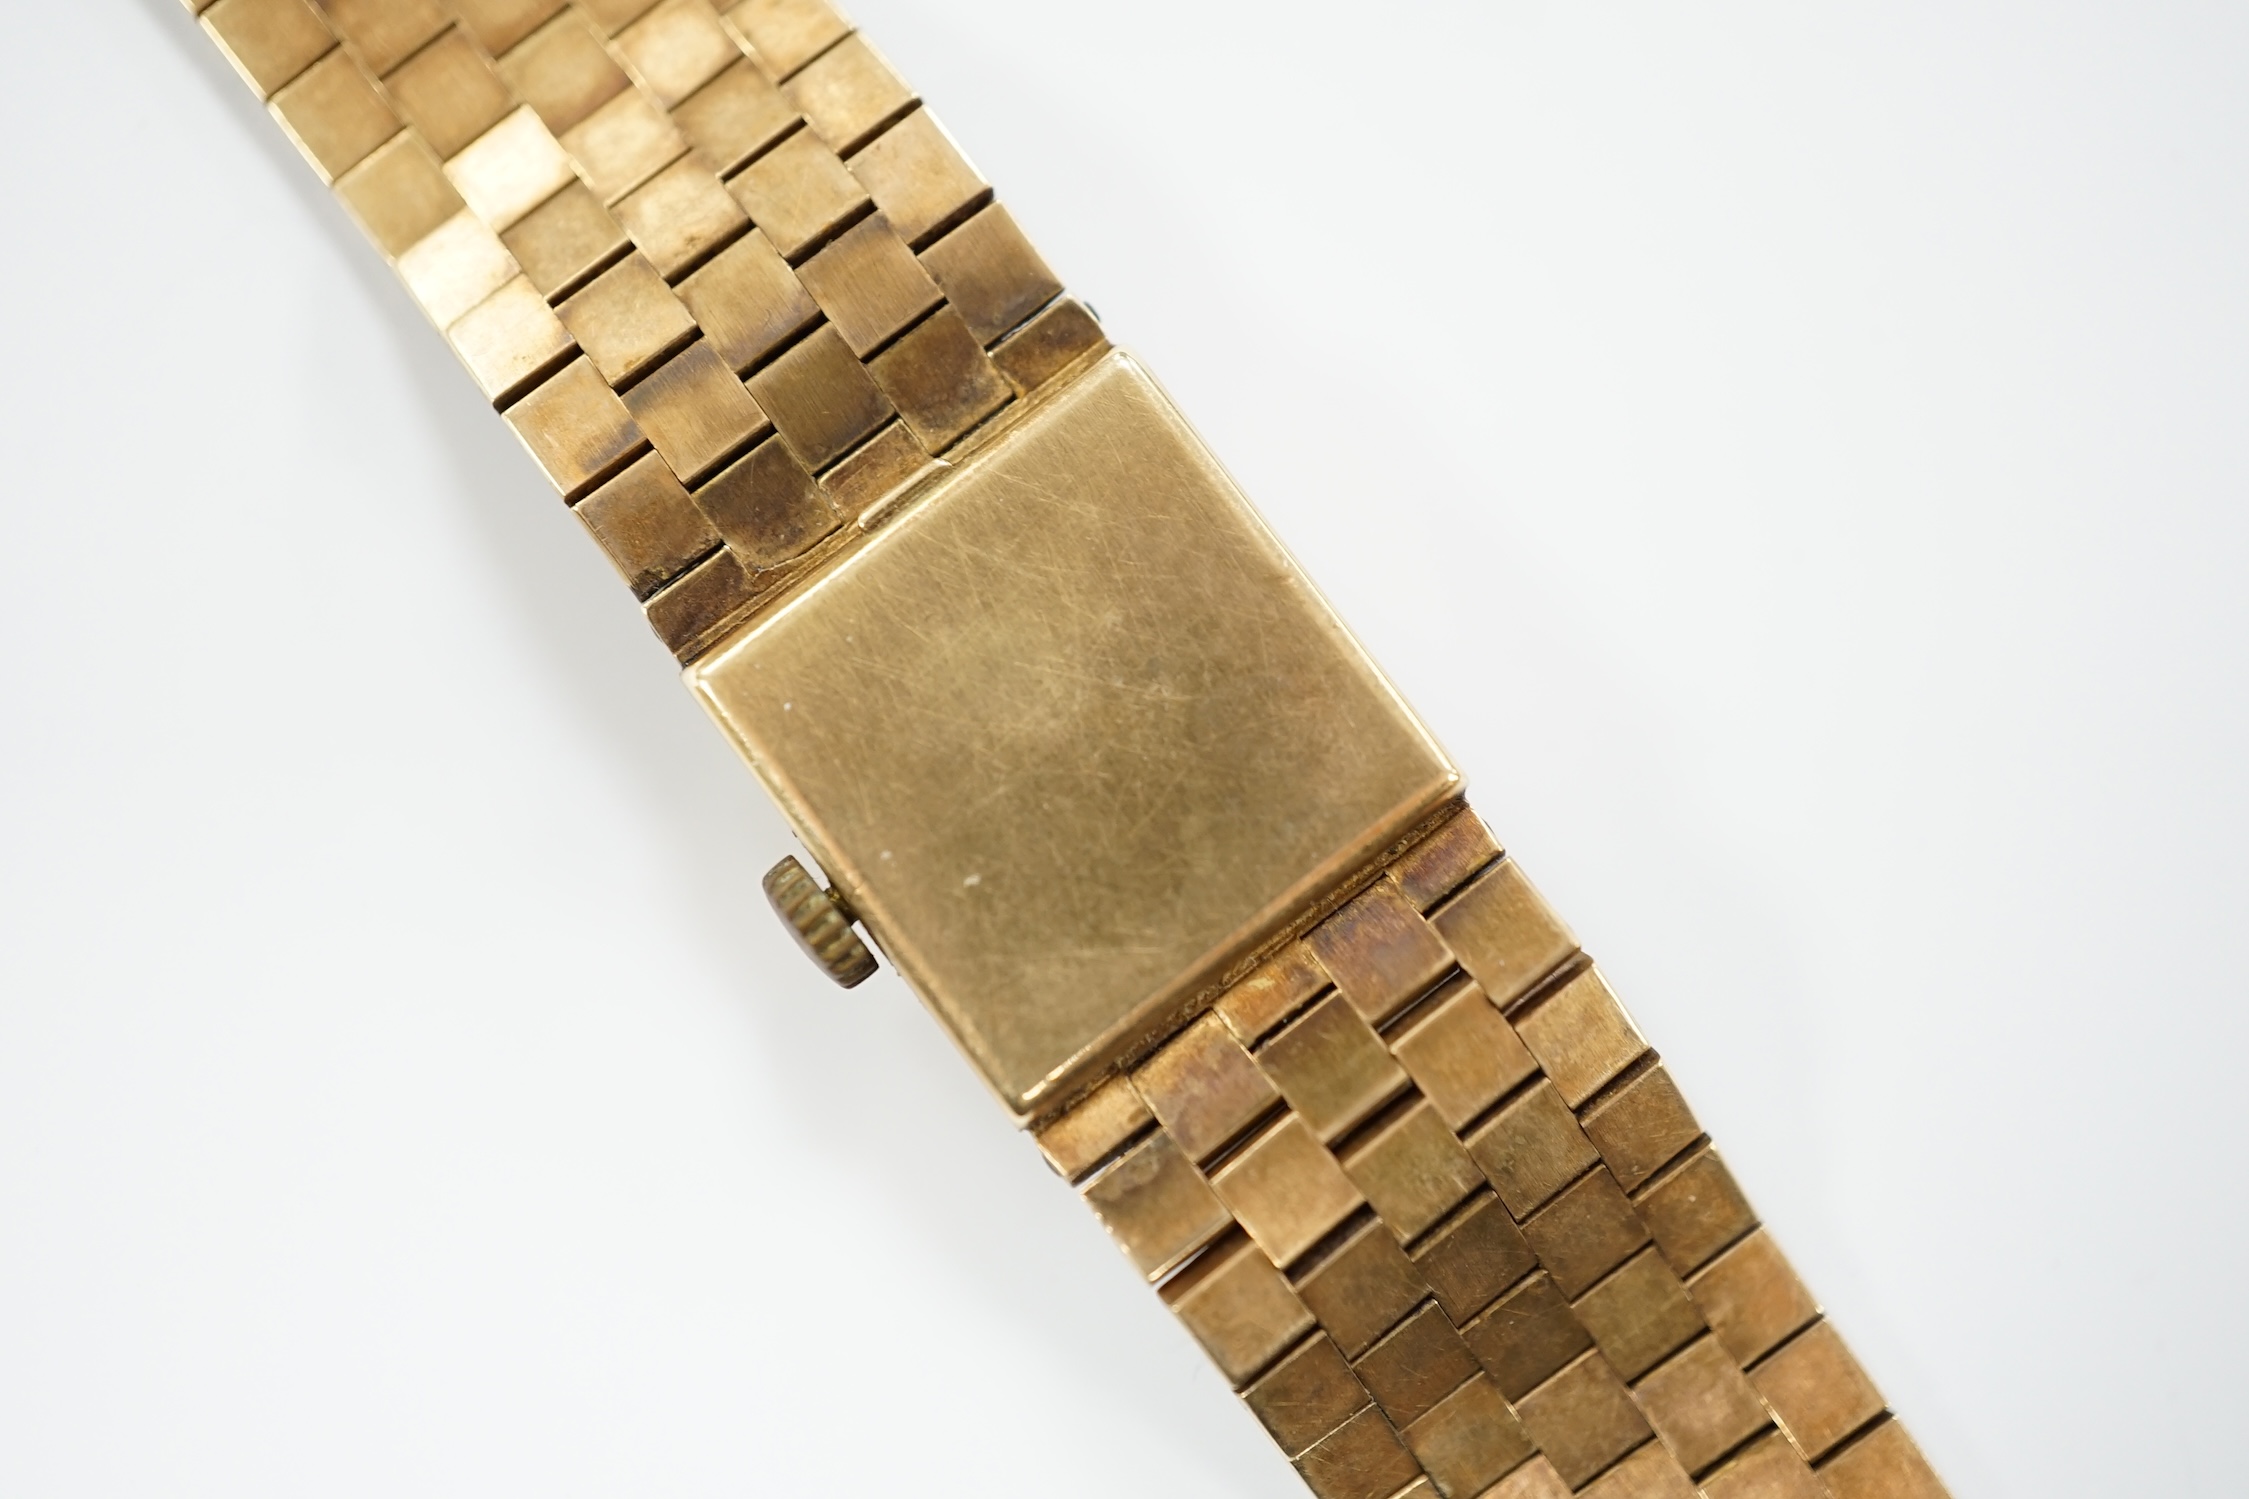 A lady's 1960's 9ct gold Accurist manual wind bracelet wrist watch, overall 18cm